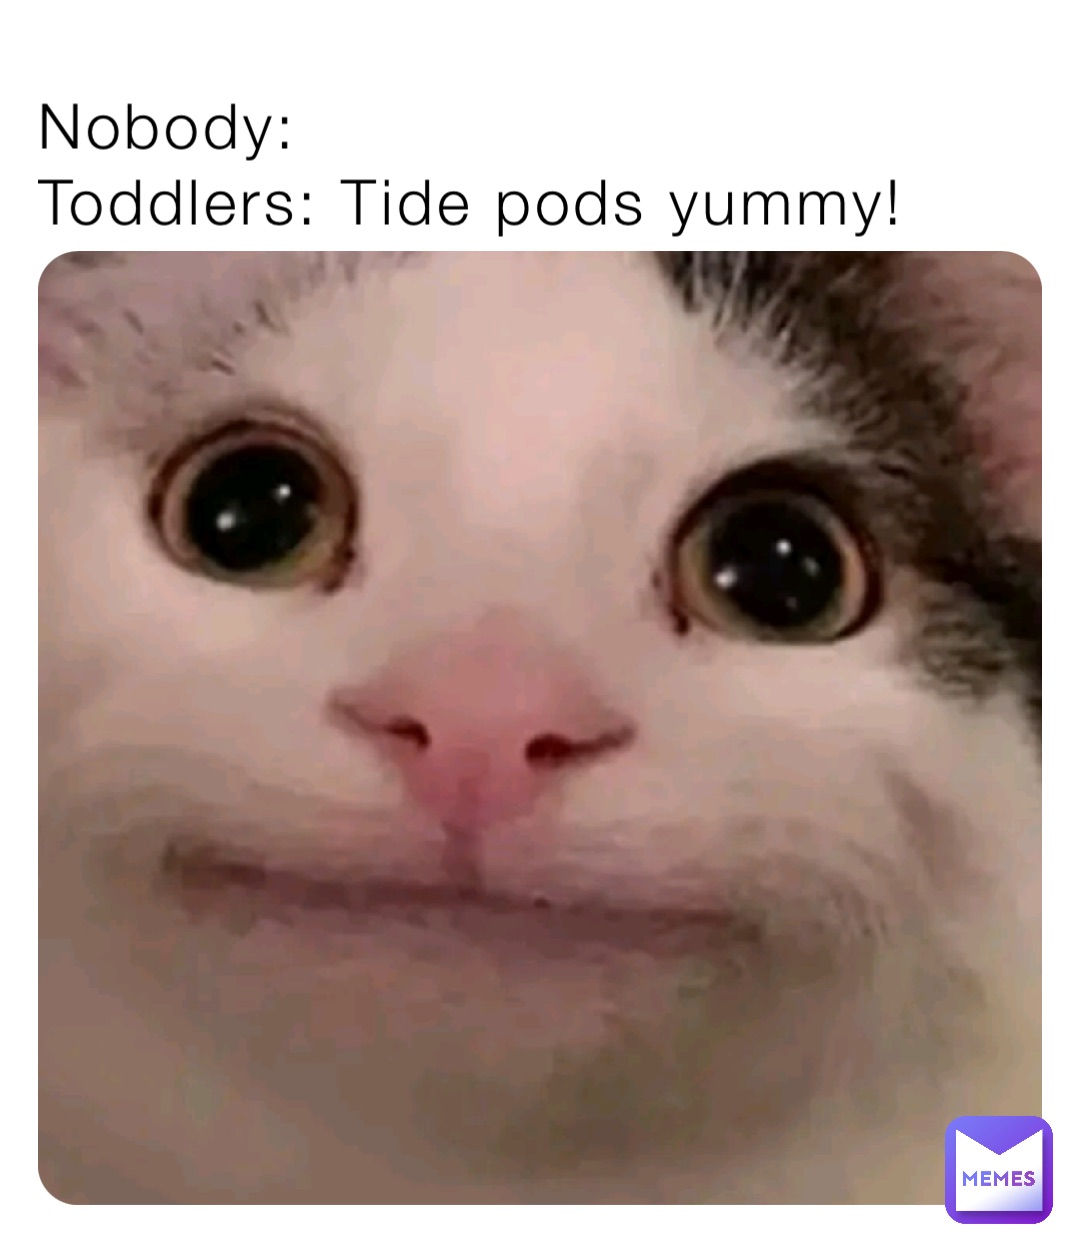 Nobody:
Toddlers: Tide pods yummy!